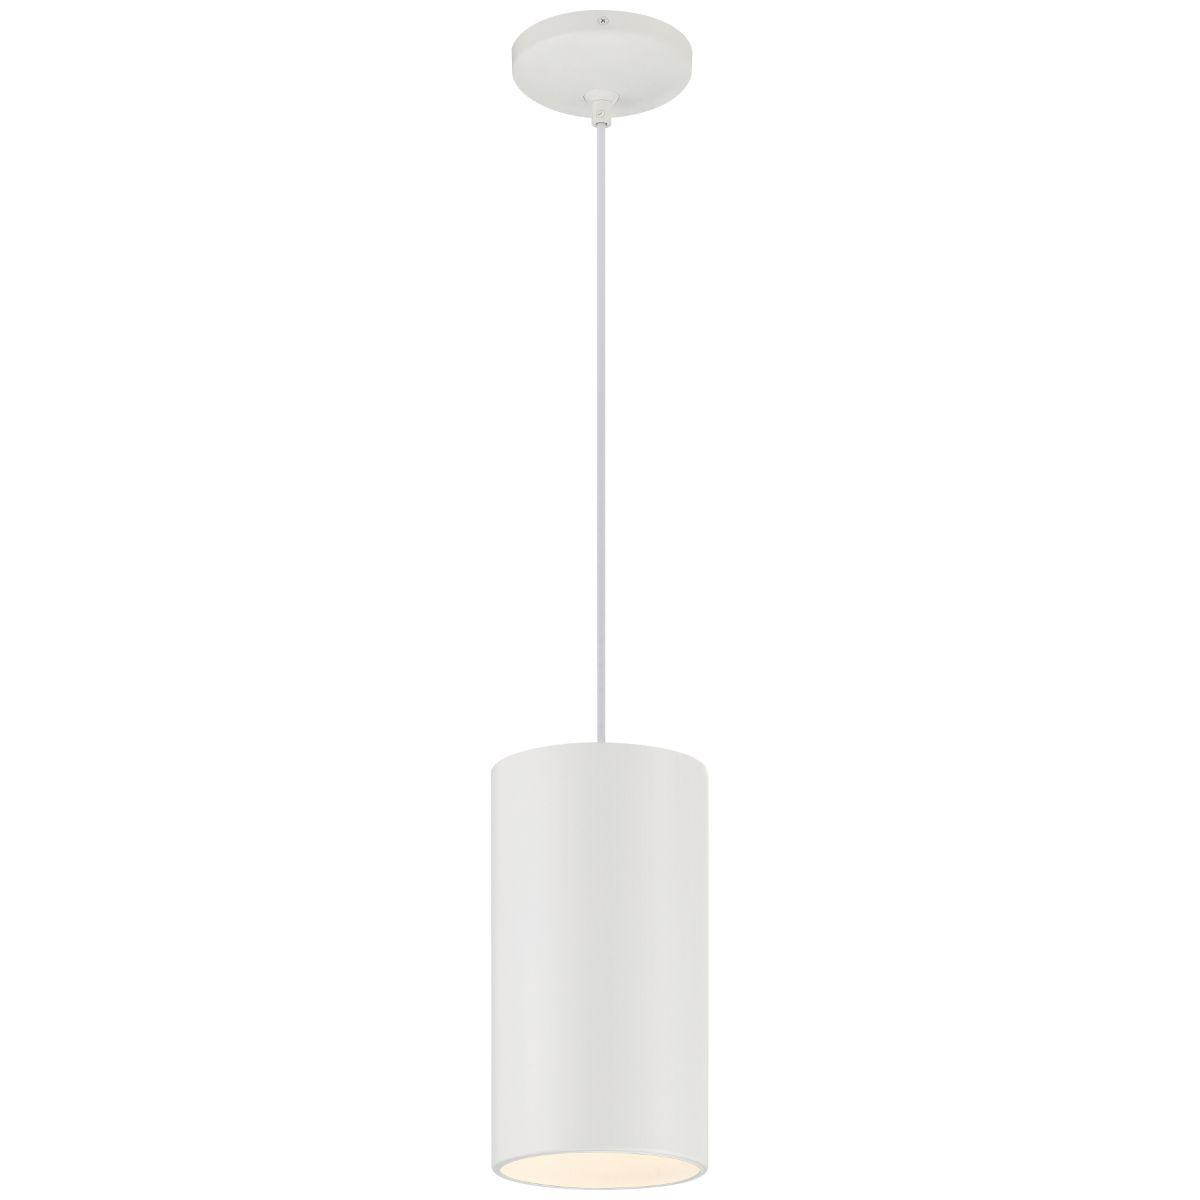 Pilson XL 11 in. LED Pendant Light with Cord